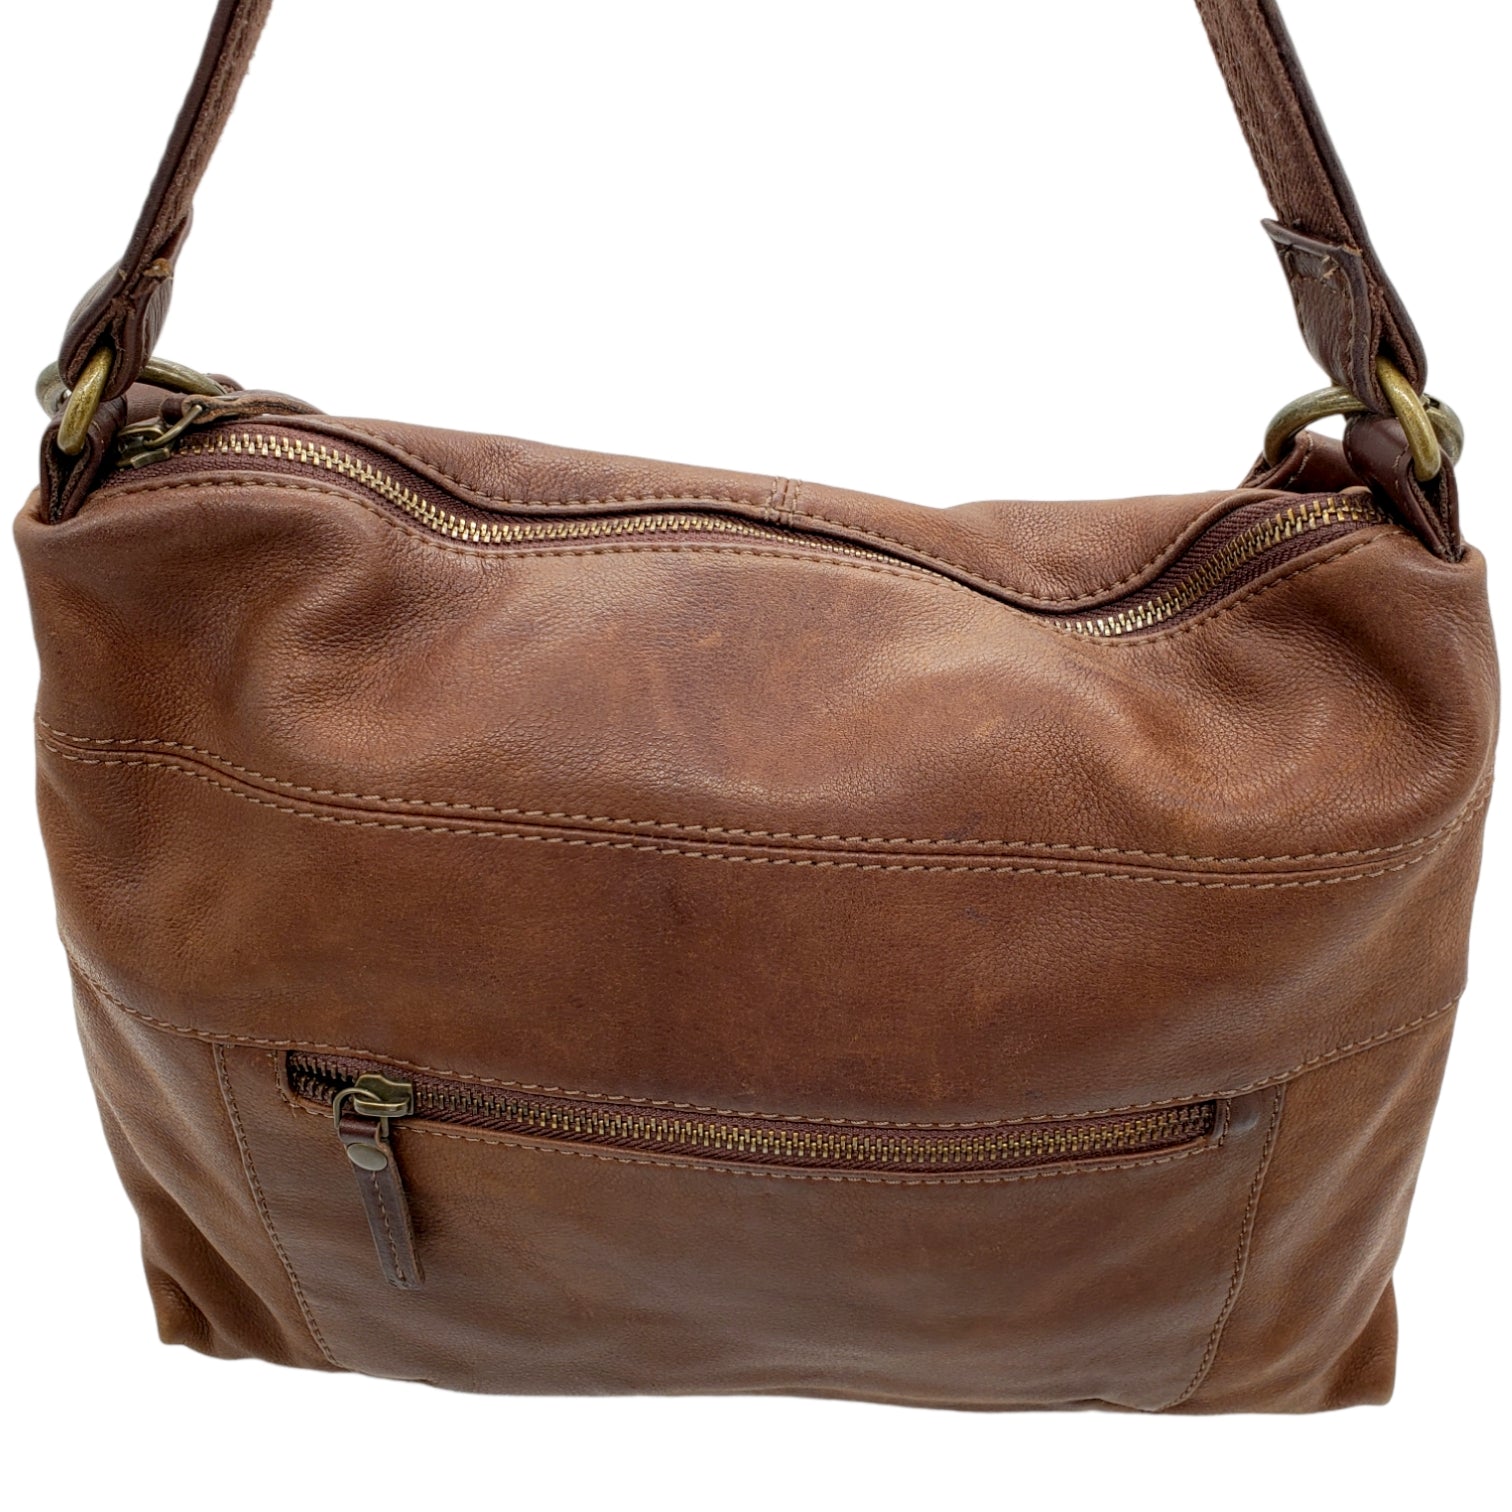 FatFace Brown Leather Cross Body/Shoulder Bag